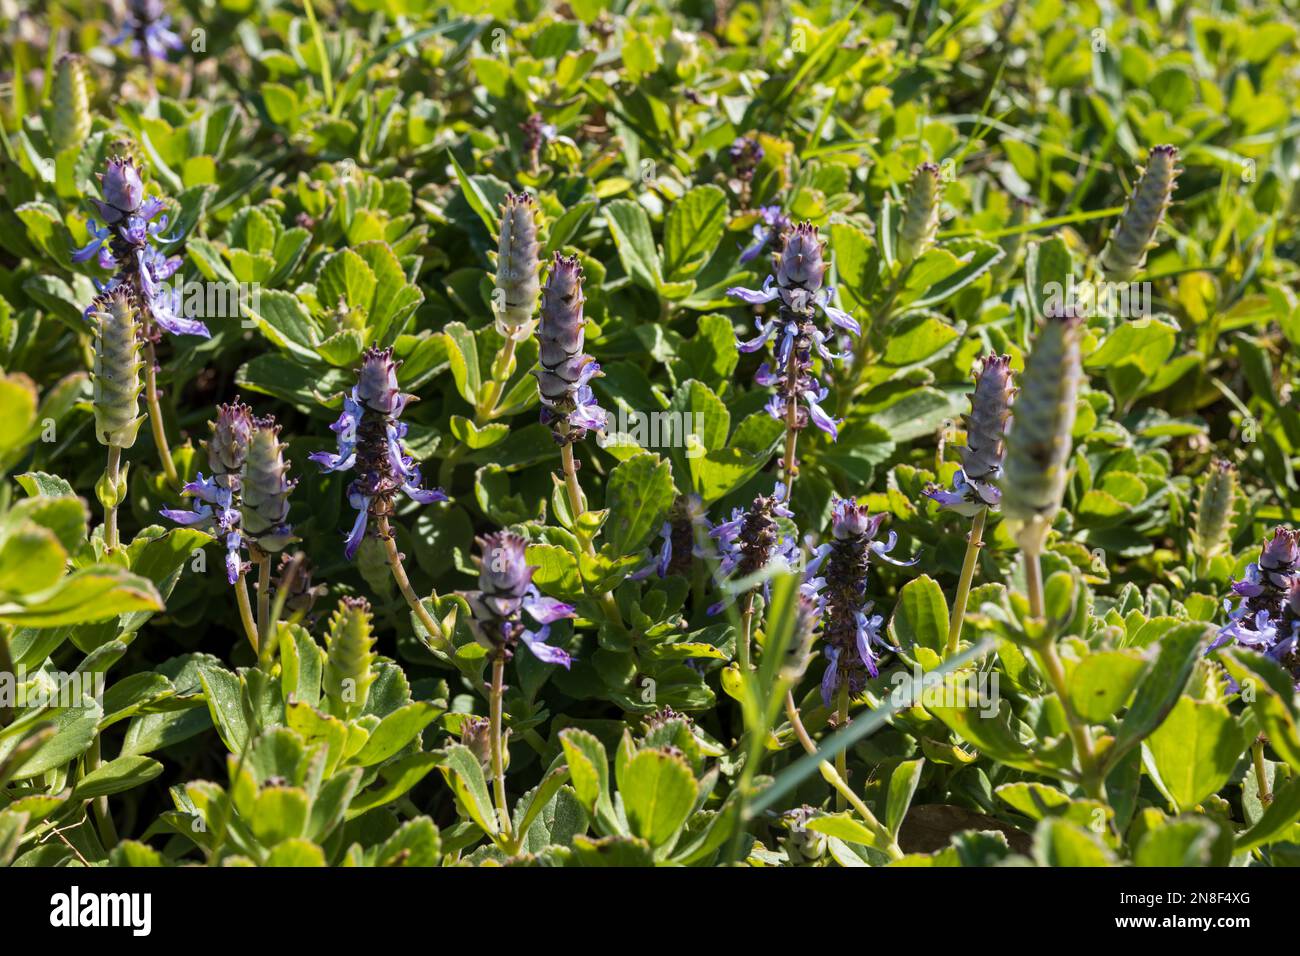 Plectranthus neochilus (Lobster Flower) - A perennial, aromatic, succulent herb, which grows as a ground-hugging wide spreading mat under one foot tal Stock Photo